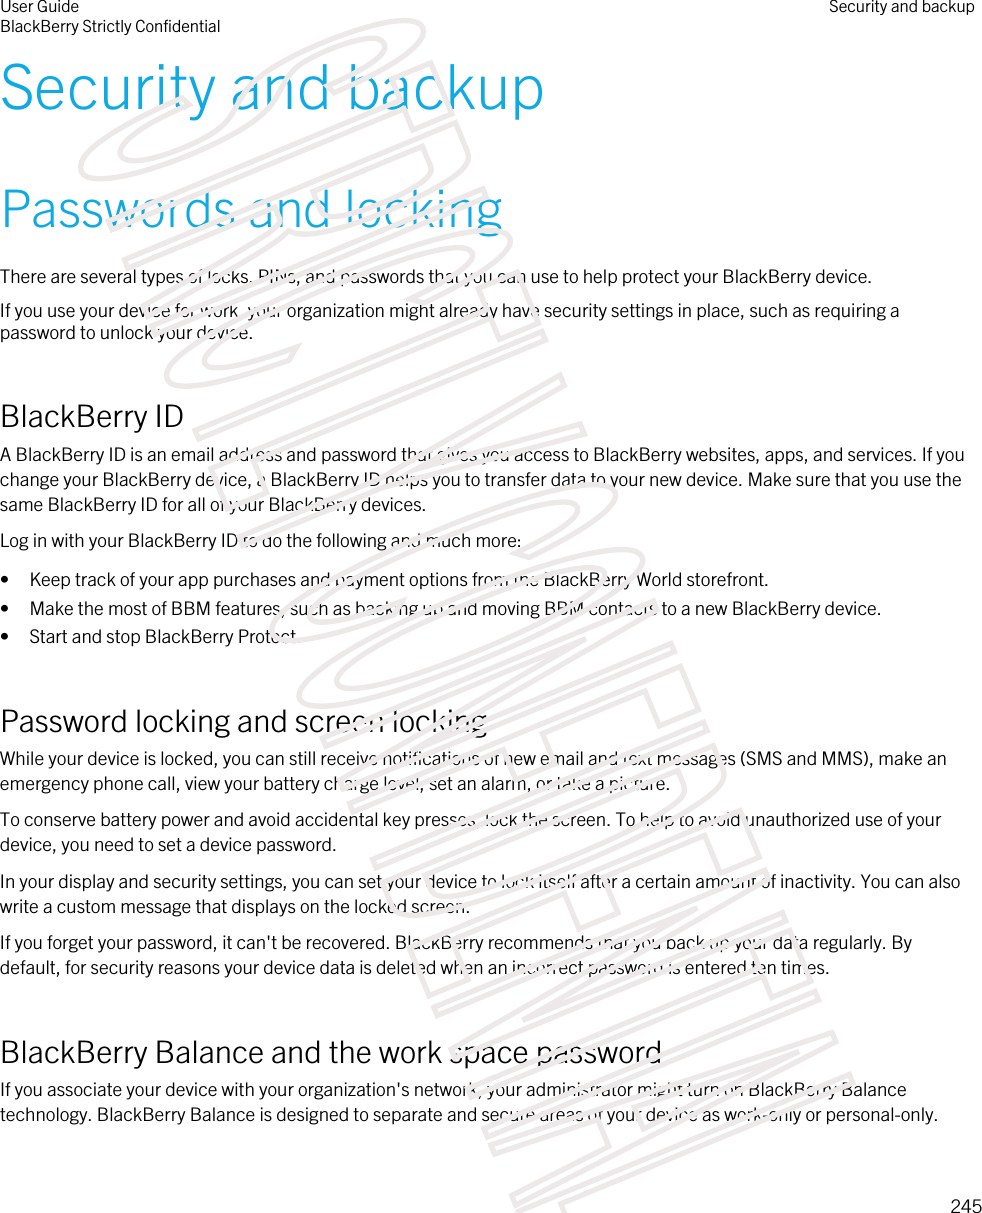 Security and backupPasswords and lockingThere are several types of locks, PINs, and passwords that you can use to help protect your BlackBerry device.If you use your device for work, your organization might already have security settings in place, such as requiring a password to unlock your device.BlackBerry IDA BlackBerry ID is an email address and password that gives you access to BlackBerry websites, apps, and services. If you change your BlackBerry device, a BlackBerry ID helps you to transfer data to your new device. Make sure that you use the same BlackBerry ID for all of your BlackBerry devices.Log in with your BlackBerry ID to do the following and much more:• Keep track of your app purchases and payment options from the BlackBerry World storefront.• Make the most of BBM features, such as backing up and moving BBM contacts to a new BlackBerry device.• Start and stop BlackBerry Protect.Password locking and screen lockingWhile your device is locked, you can still receive notifications of new email and text messages (SMS and MMS), make an emergency phone call, view your battery charge level, set an alarm, or take a picture.To conserve battery power and avoid accidental key presses, lock the screen. To help to avoid unauthorized use of your device, you need to set a device password.In your display and security settings, you can set your device to lock itself after a certain amount of inactivity. You can also write a custom message that displays on the locked screen.If you forget your password, it can&apos;t be recovered. BlackBerry recommends that you back up your data regularly. By default, for security reasons your device data is deleted when an incorrect password is entered ten times.BlackBerry Balance and the work space passwordIf you associate your device with your organization&apos;s network, your administrator might turn on BlackBerry Balance technology. BlackBerry Balance is designed to separate and secure areas of your device as work-only or personal-only.User GuideBlackBerry Strictly Confidential Security and backup245STRICTLY CONFIDENTIAL